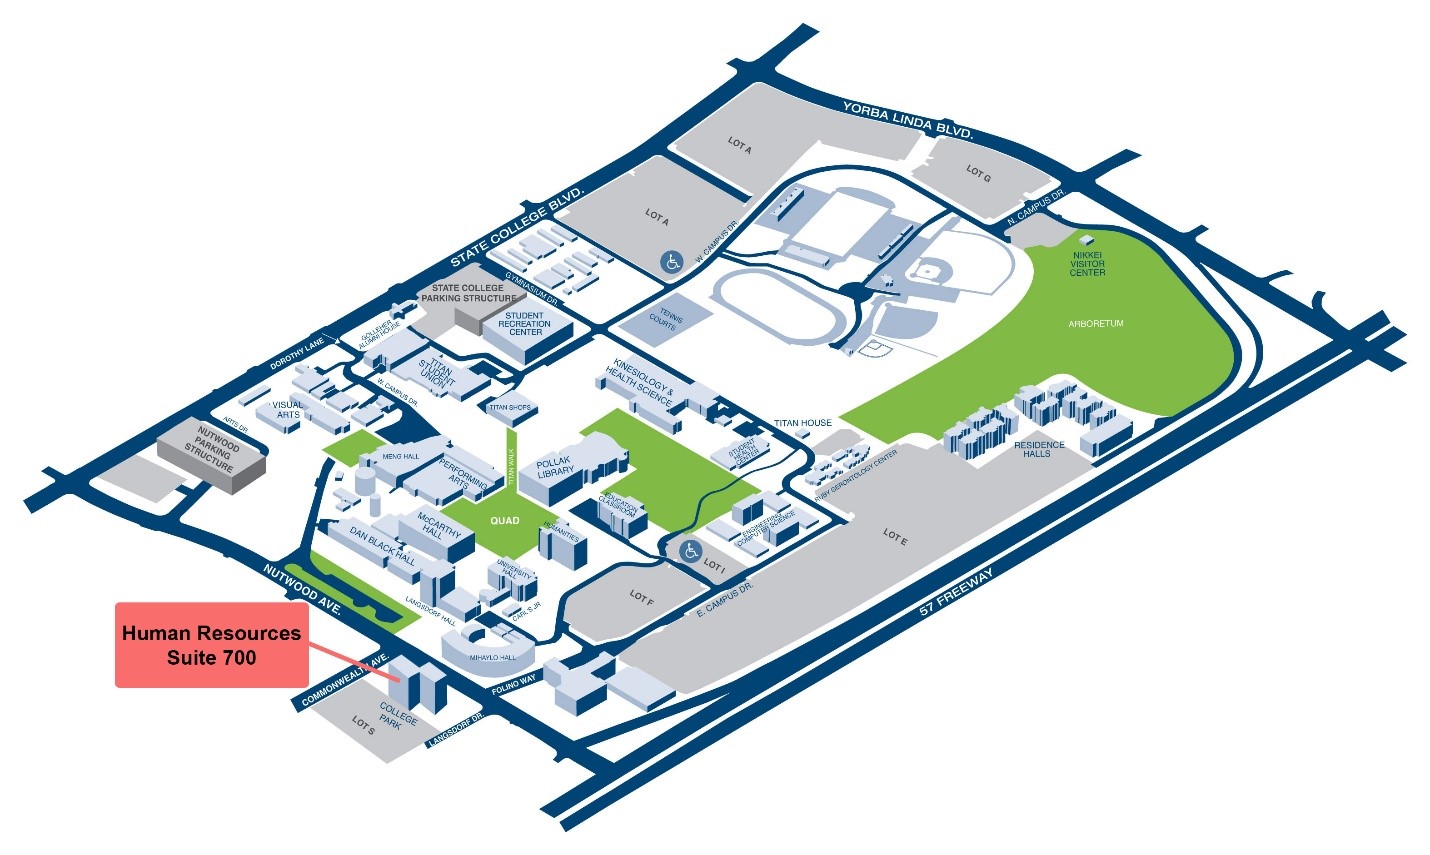 Map of CSUF campus arrow pointing to suite 700 on south side of campus